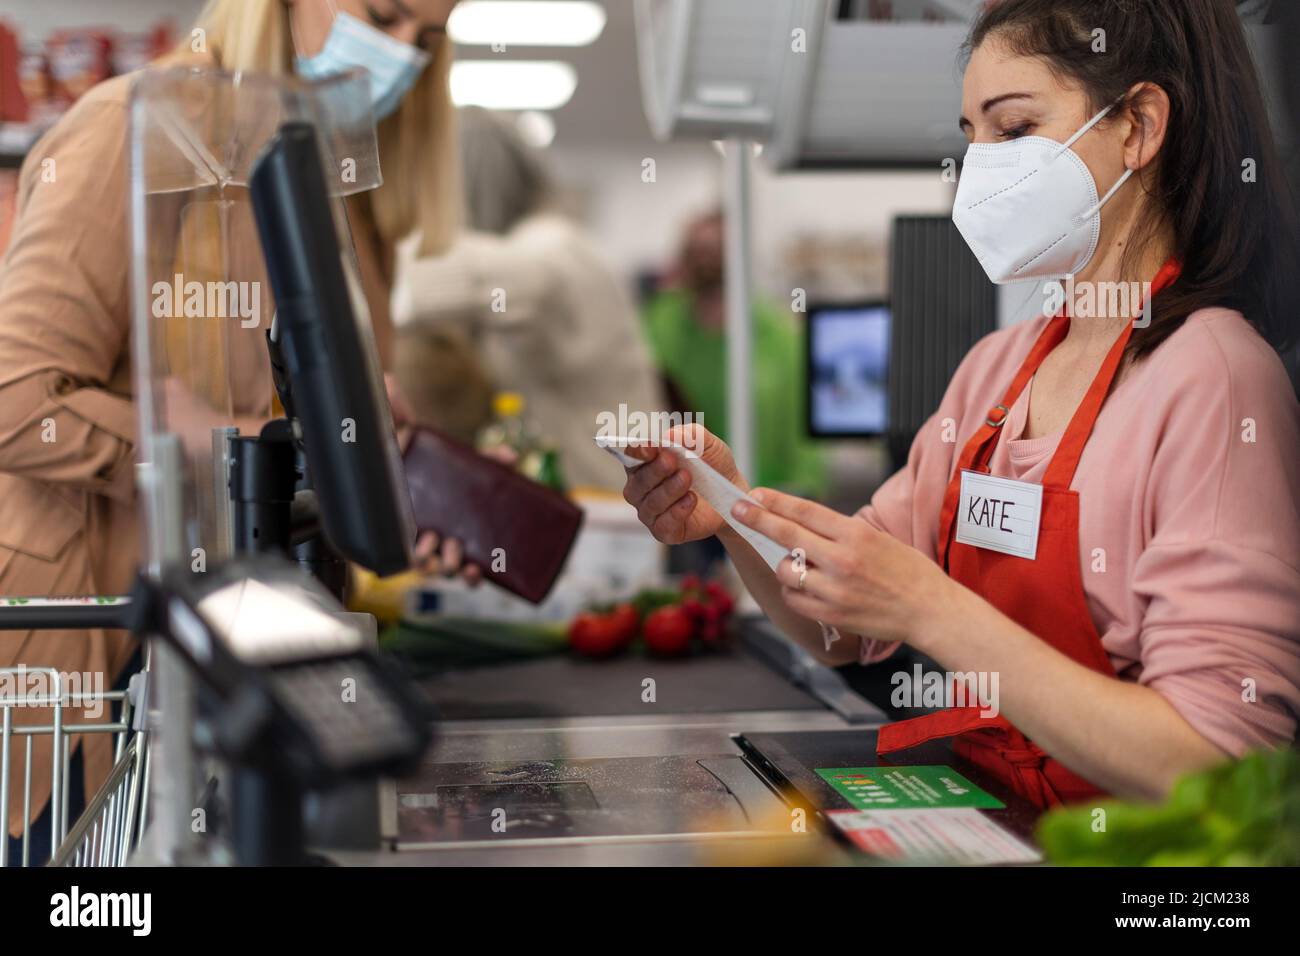 Checkout counter cashier looking to pay slip after coustomer's complaint in supermarket, Stock Photo